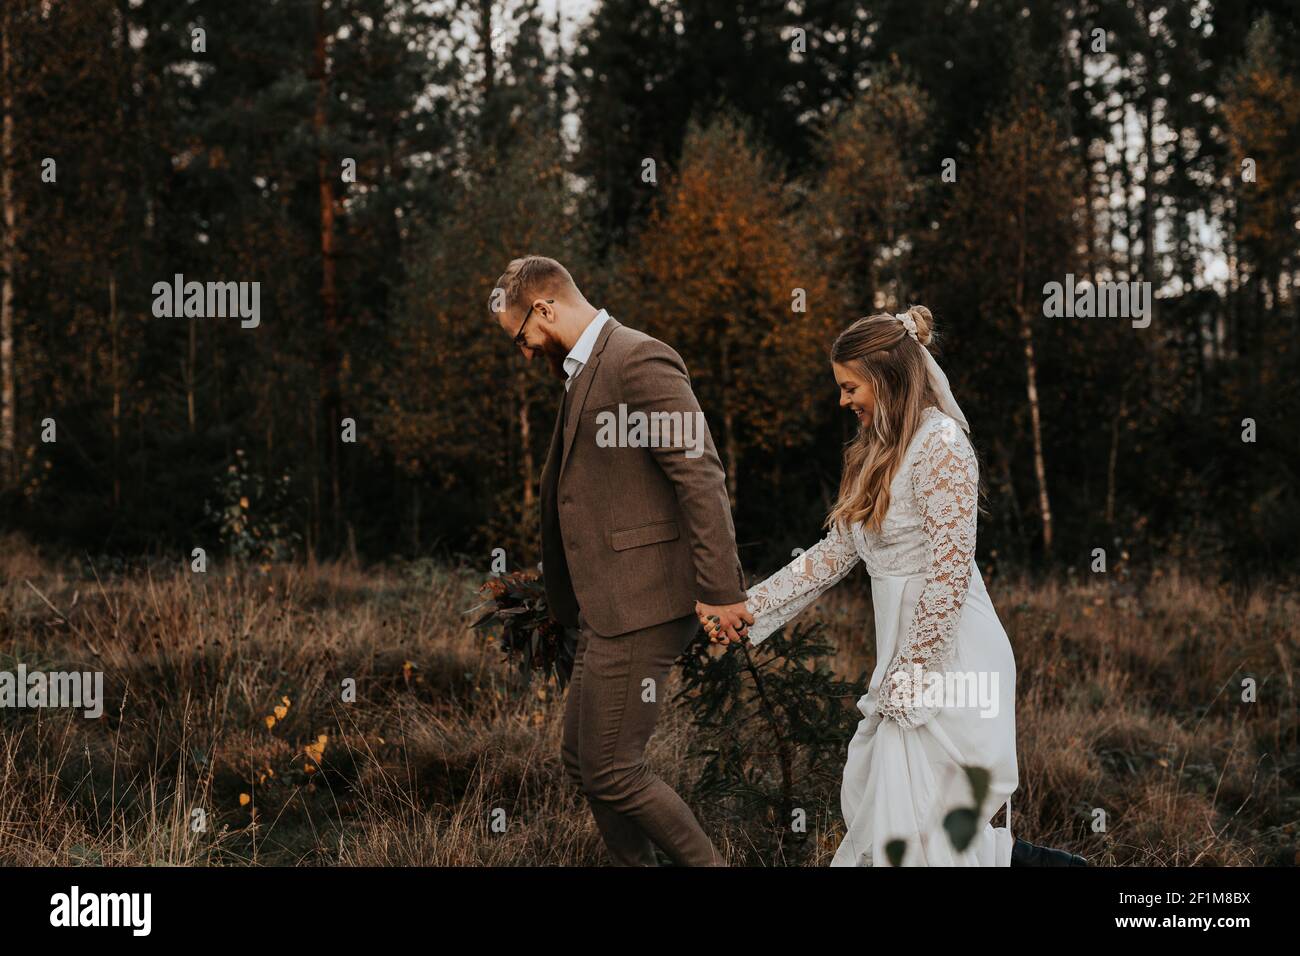 Bride and groom walking together Stock Photo